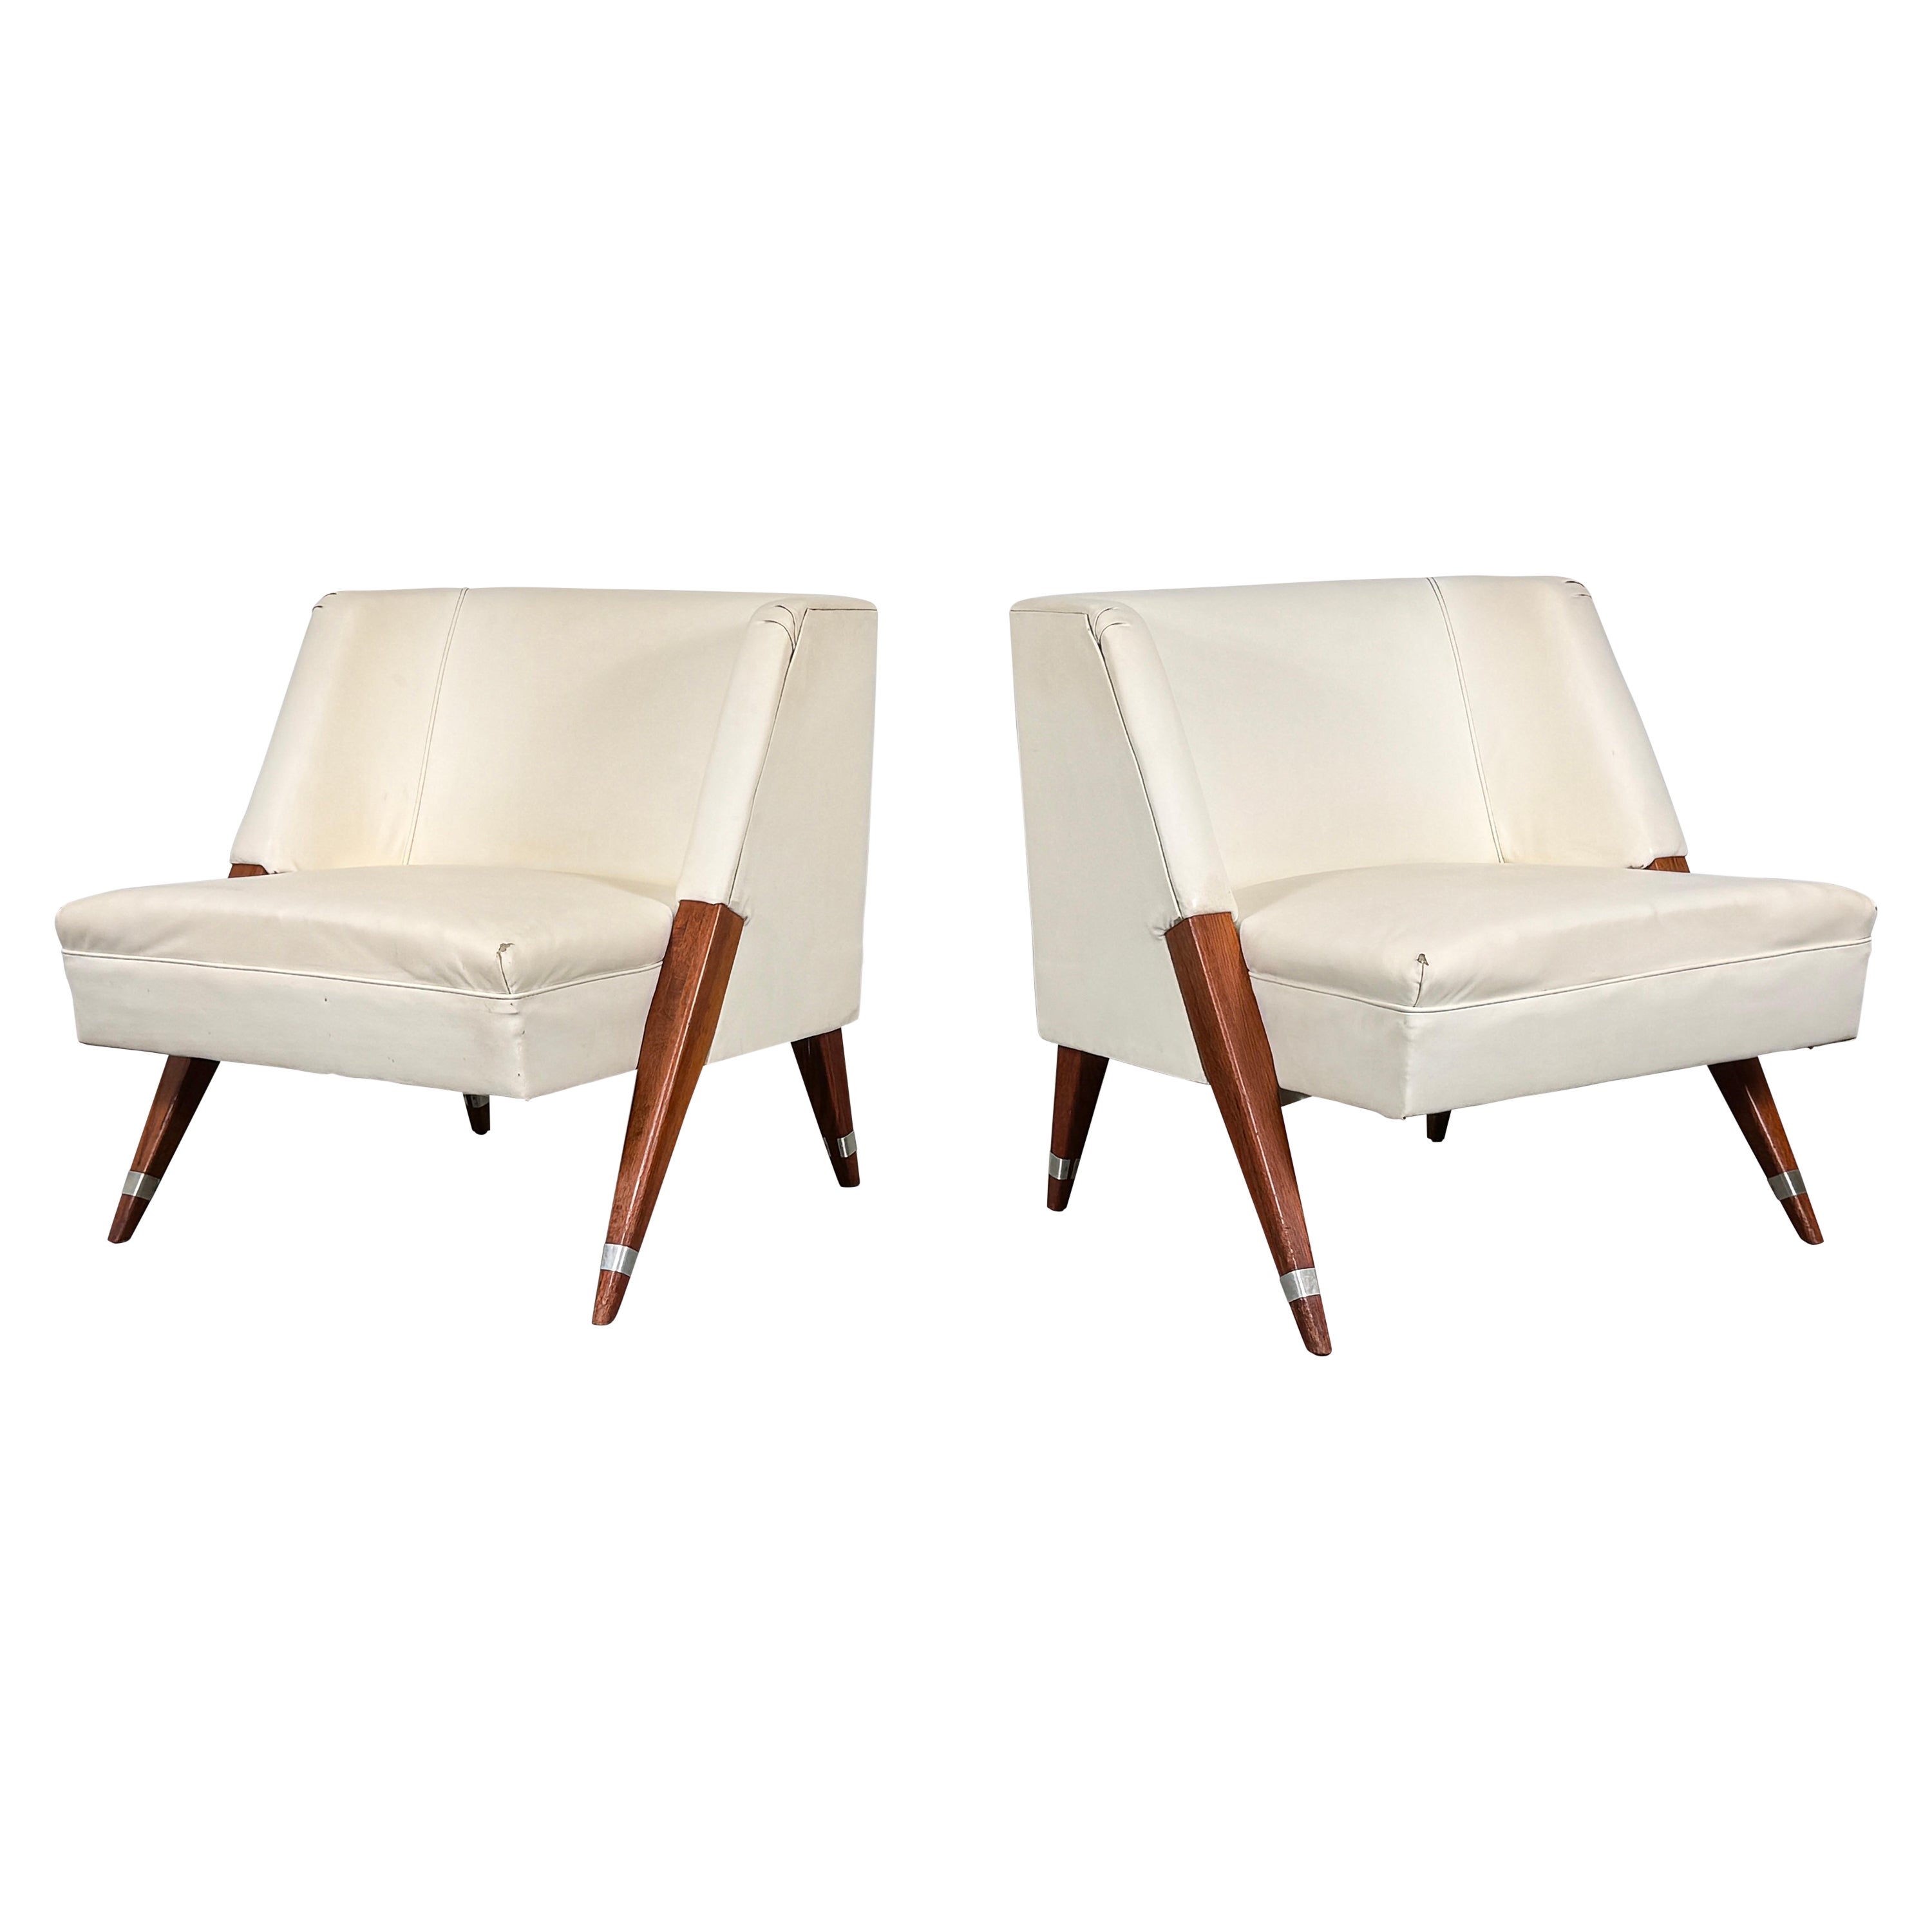 Pair Mid Century Modern Walnut Lounge Chairs In the Style of Gio Ponti 1950s